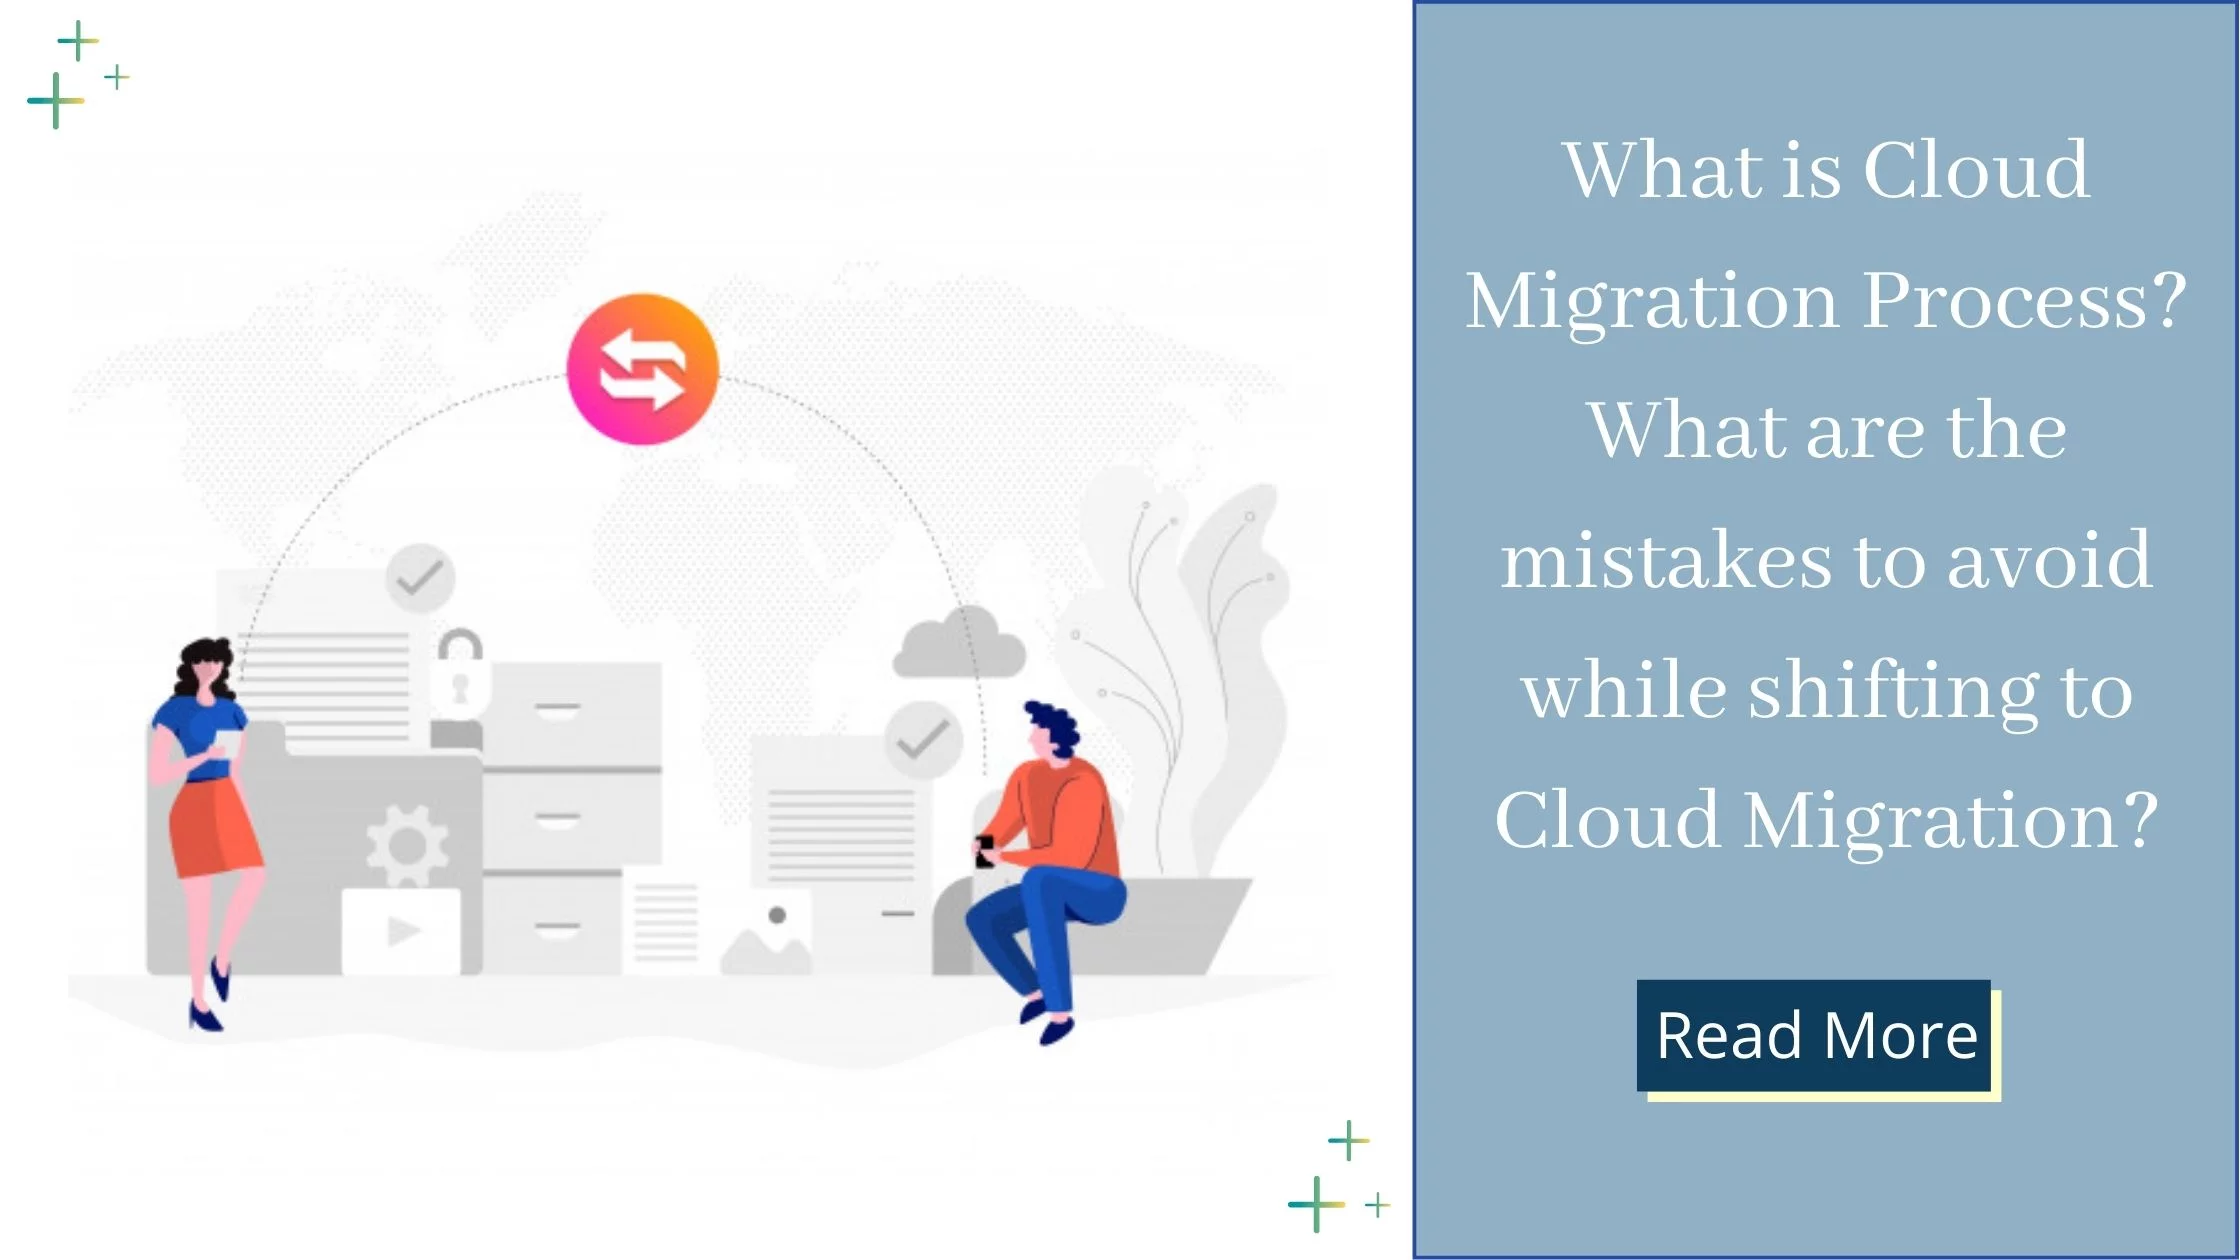 Cloud migration & mistakes to avoid